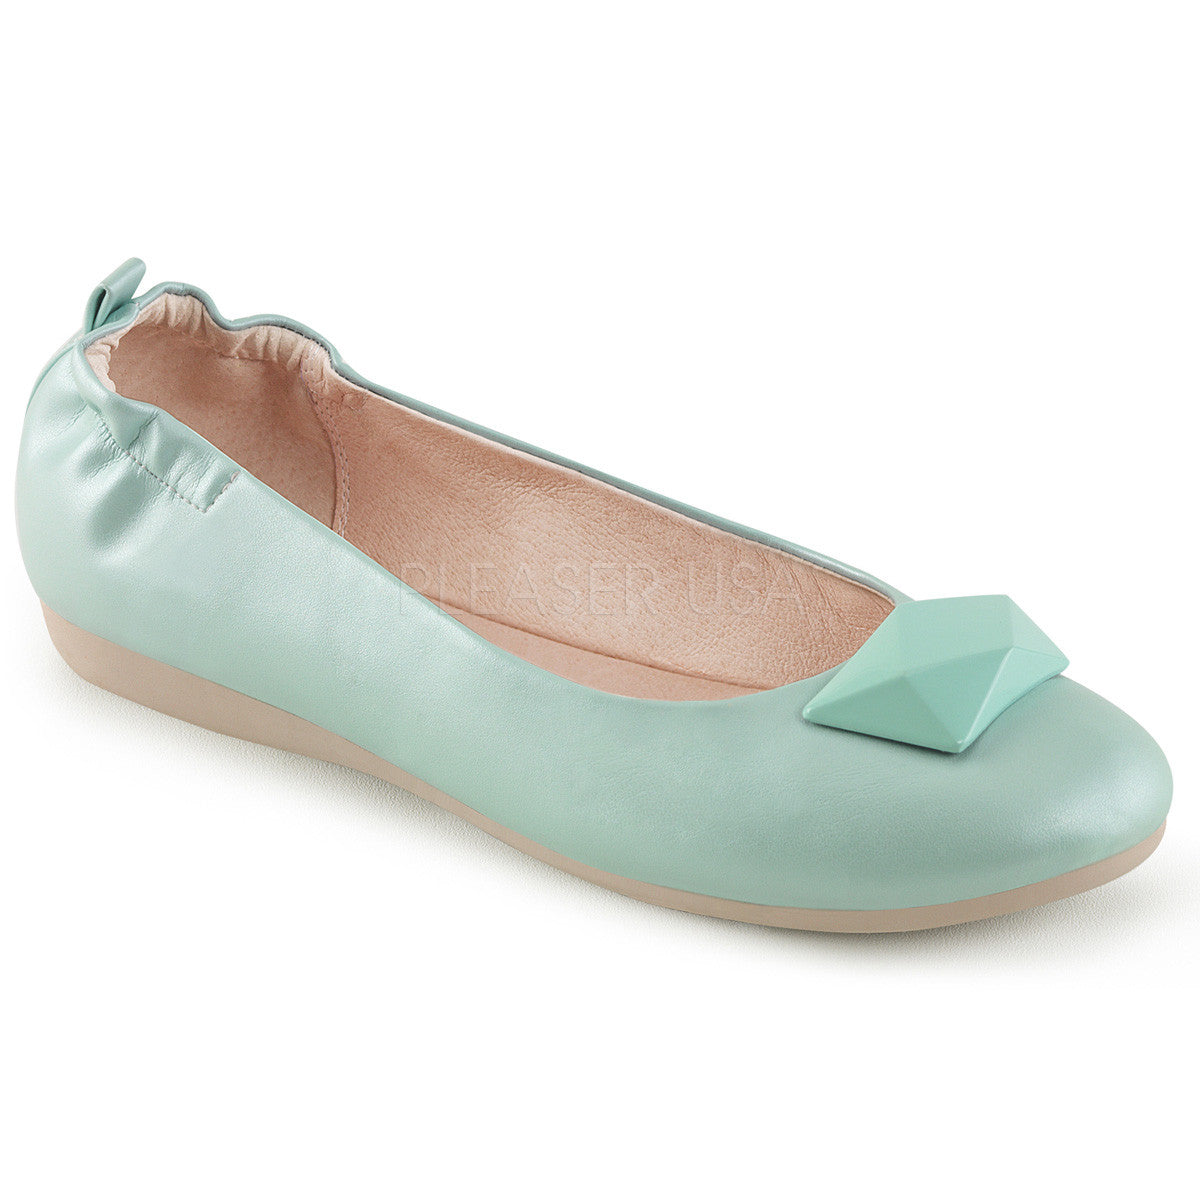 Round Toe Foldable Ballet Flats With Elasticated Heel and Geometric Adornment At Toe|Pin Up Couture OLIVE-08 Aqua